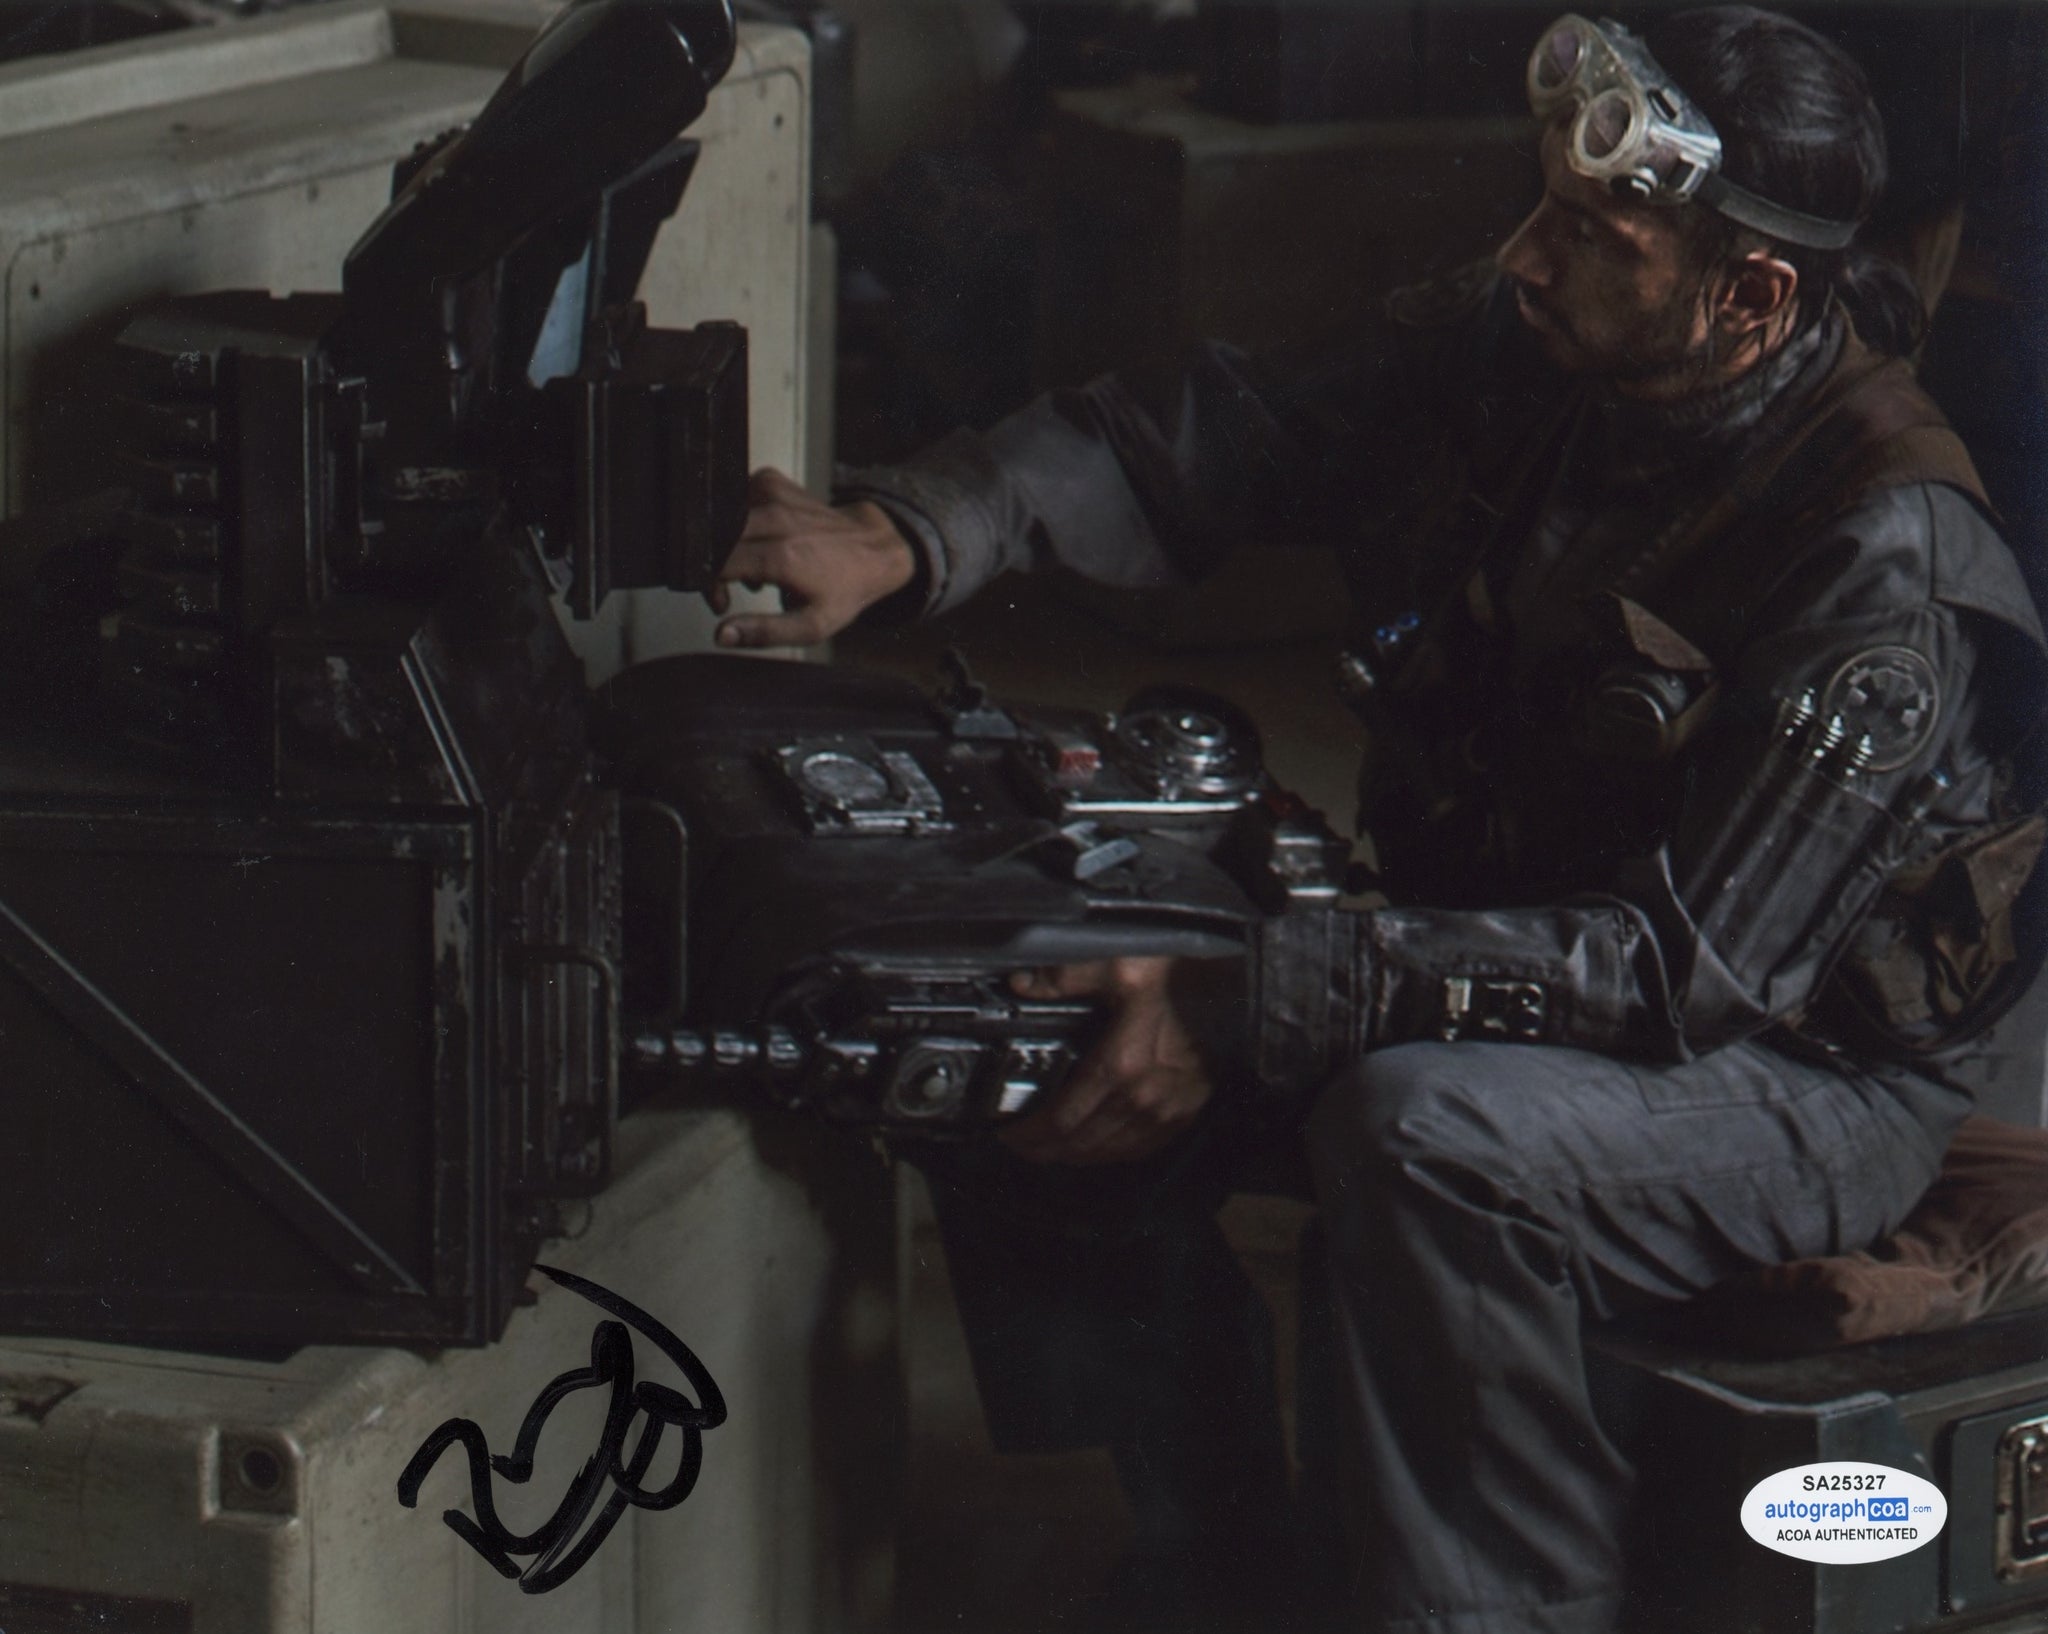 Riz Ahmed Star Wars Rogue One Signed Autograph 8x10 Photo ACOA #3 - Outlaw Hobbies Authentic Autographs